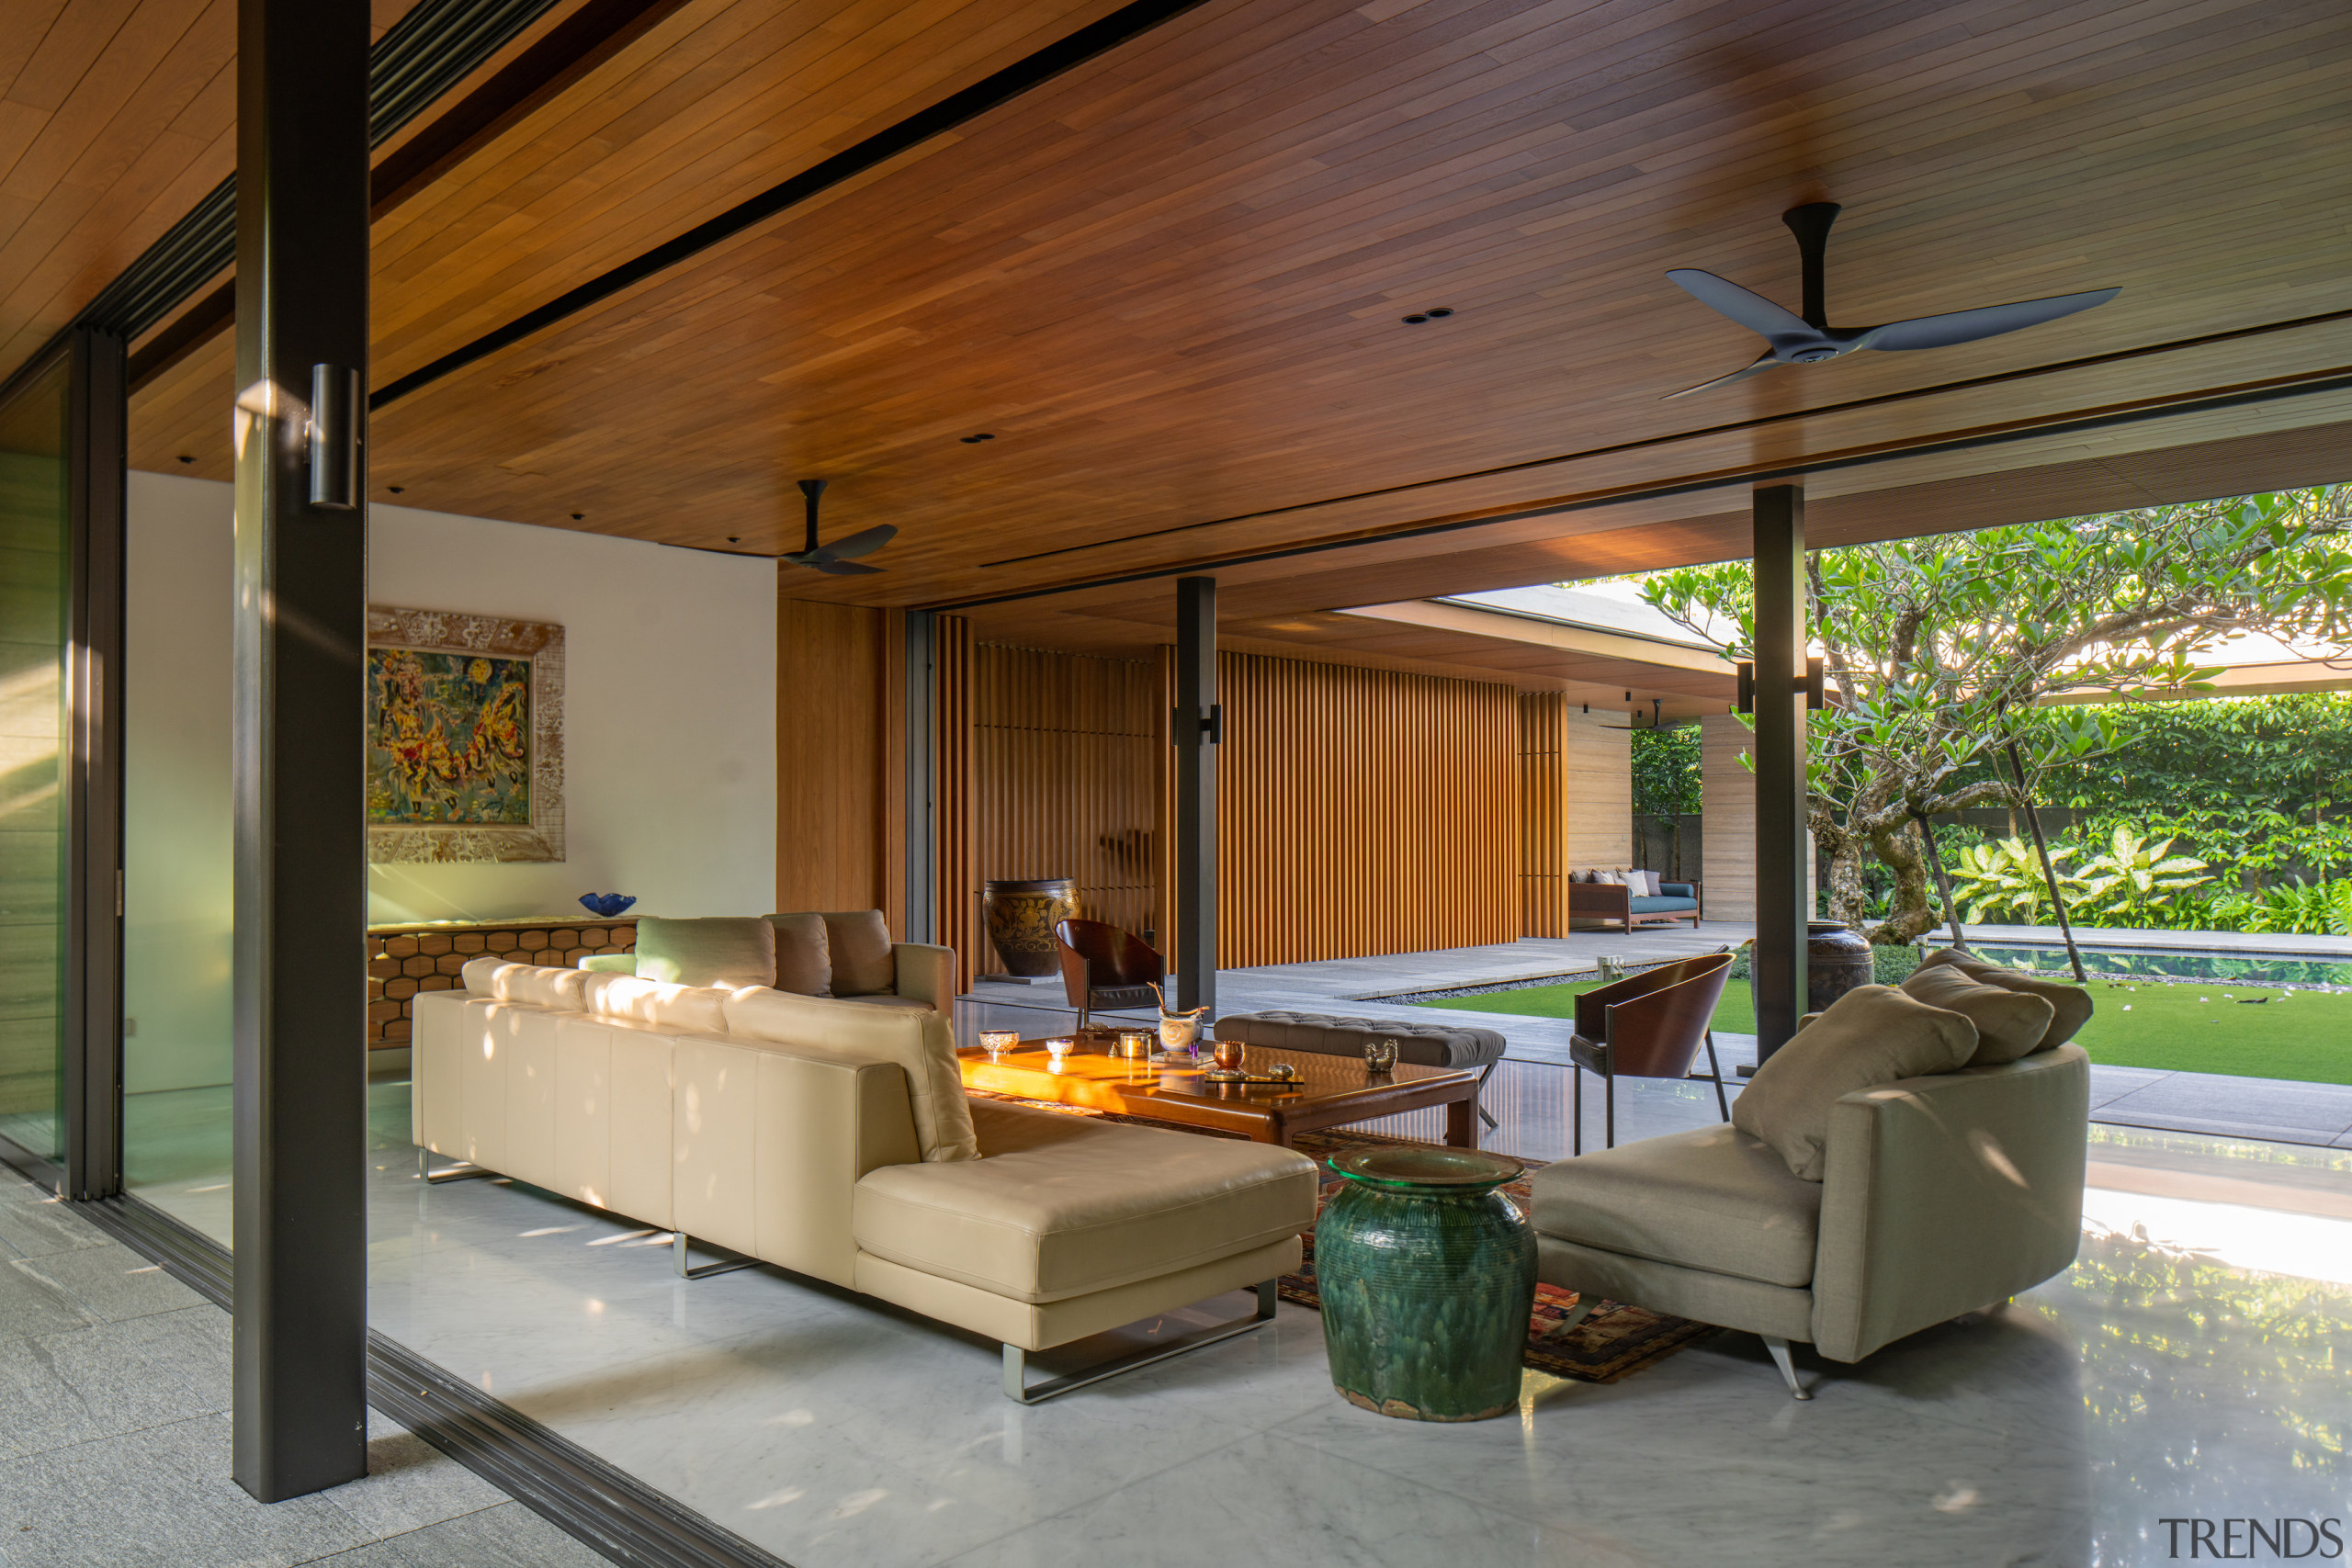 The living space opens to the outdoors on 